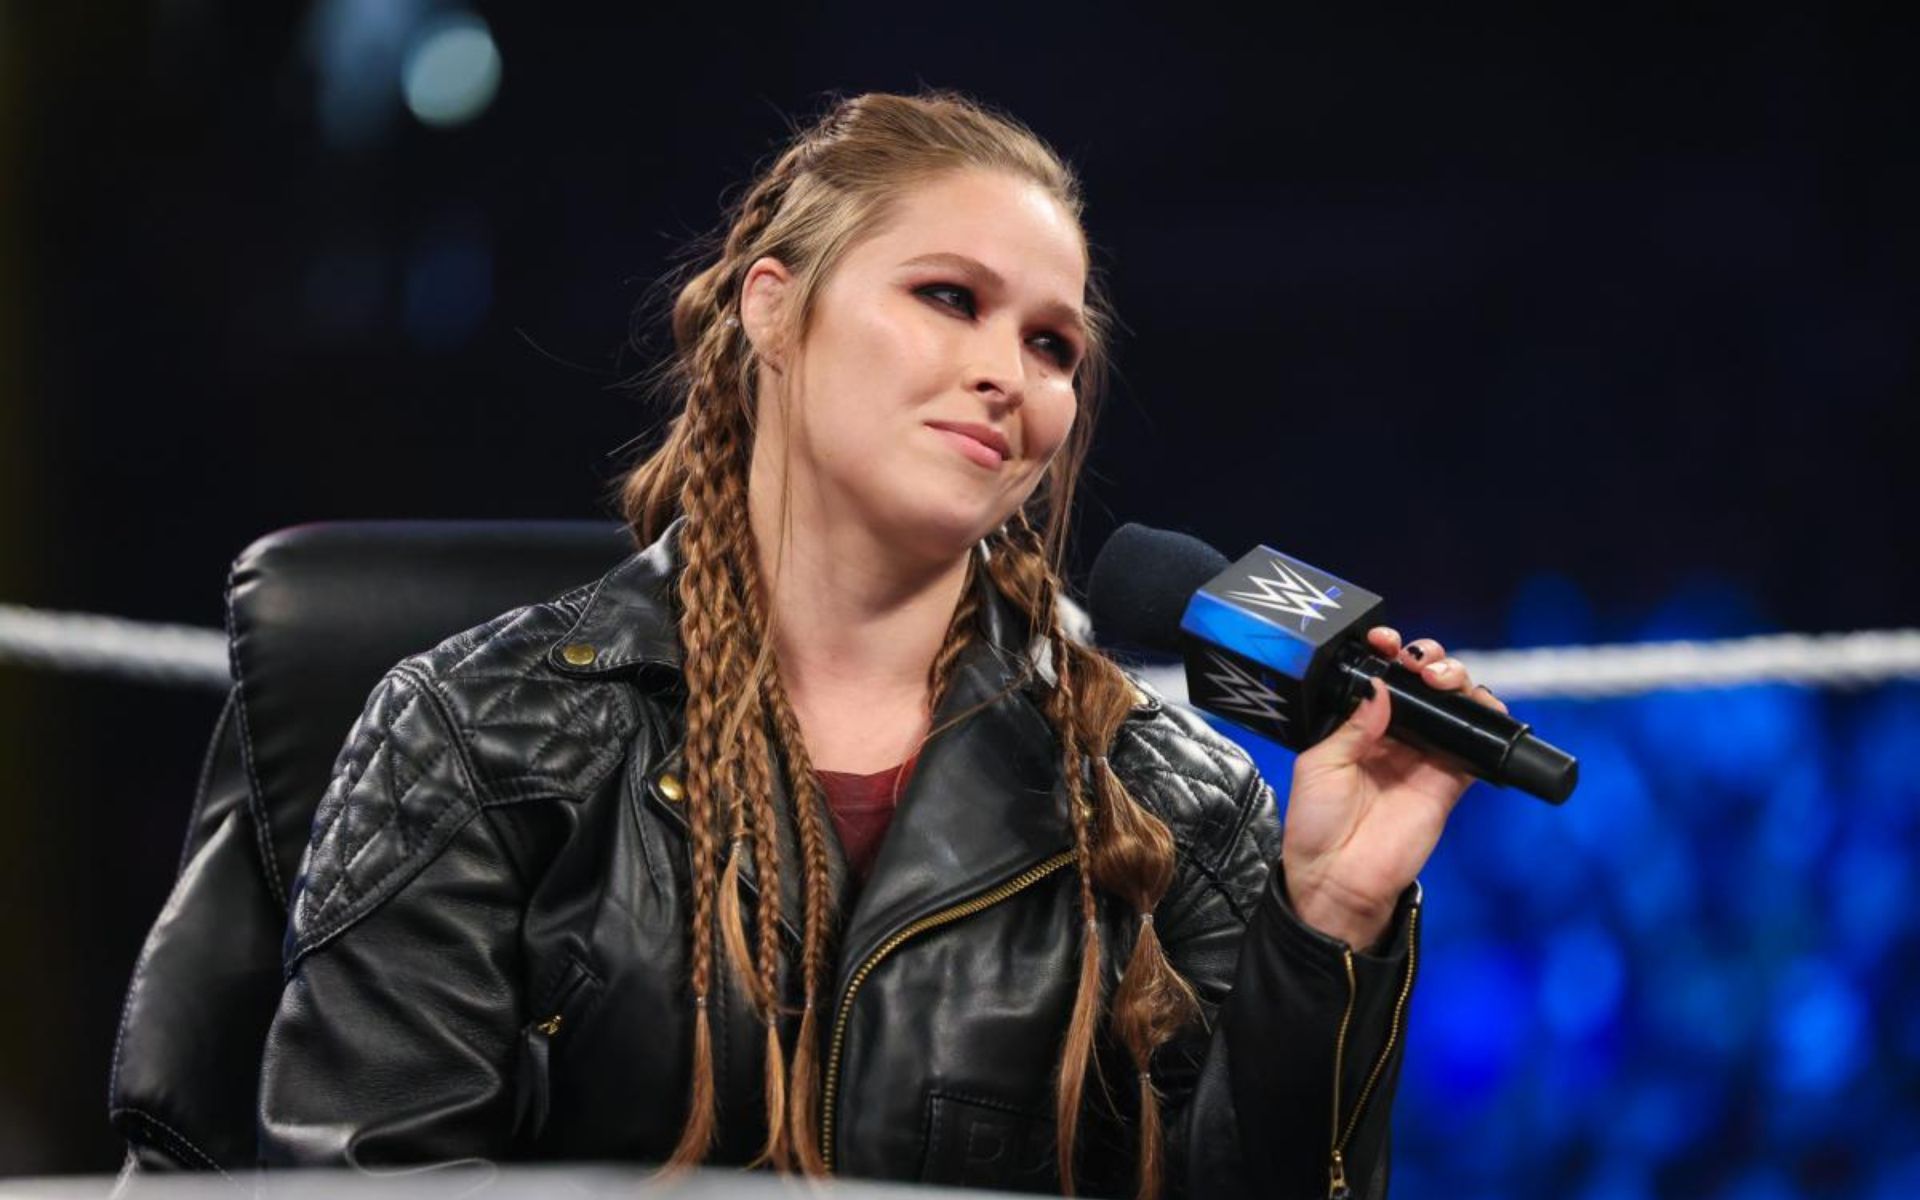 Ronda Rousey during the contract signing for the WrestleMania Backlash match